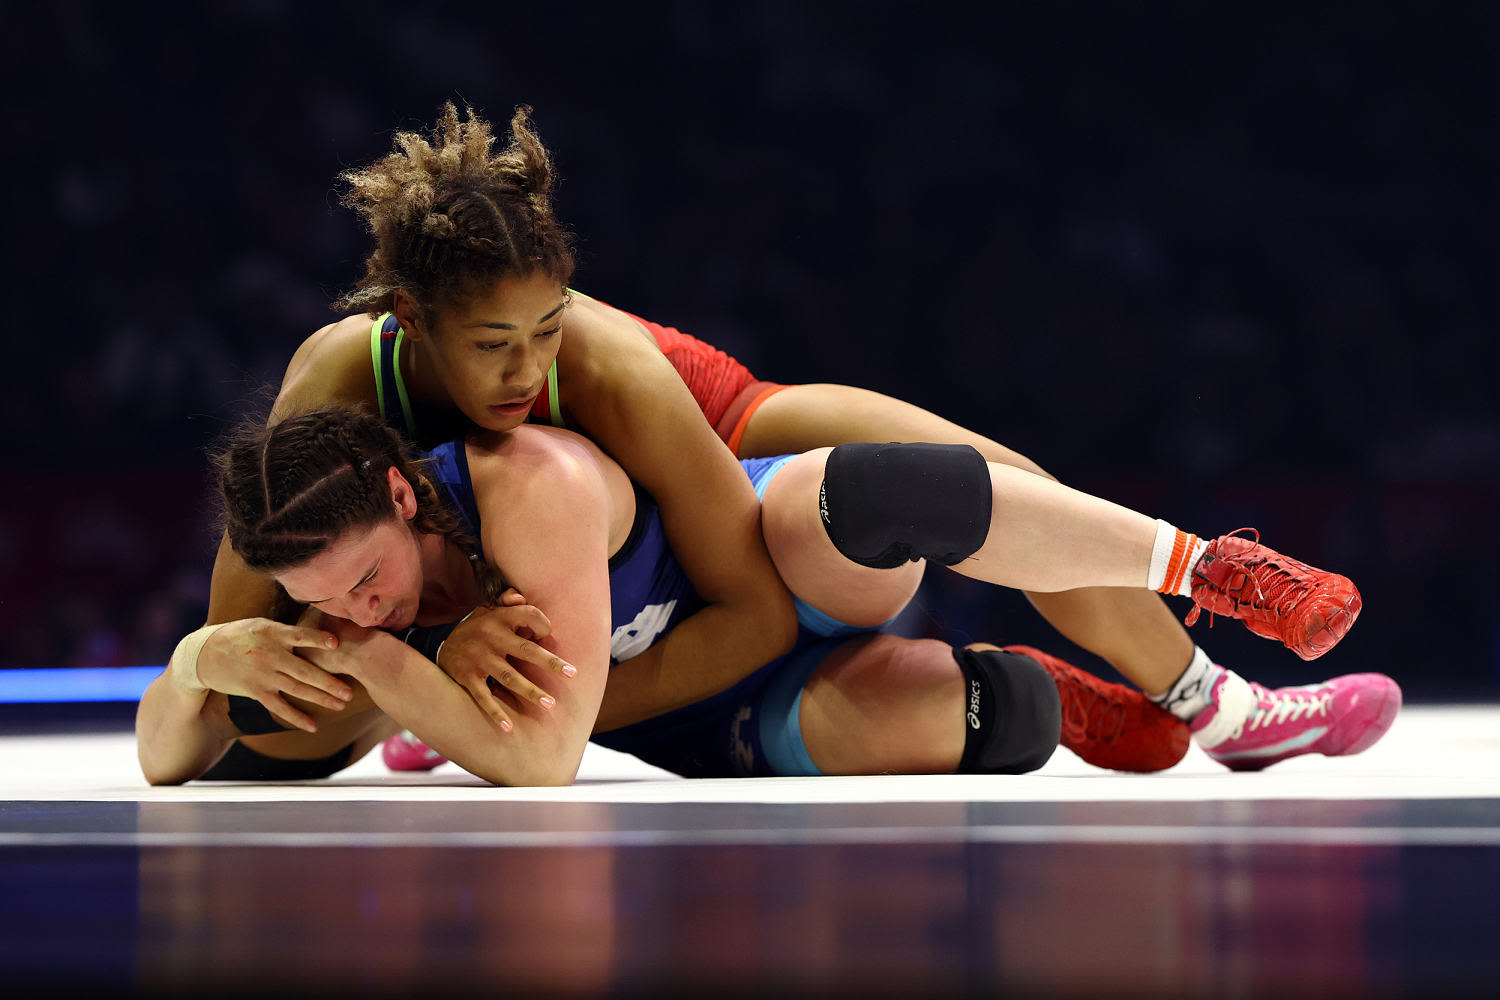 Drawn to wrestling as a child, Kennedy Blades has been dreaming of Olympic gold since she was 8 years old